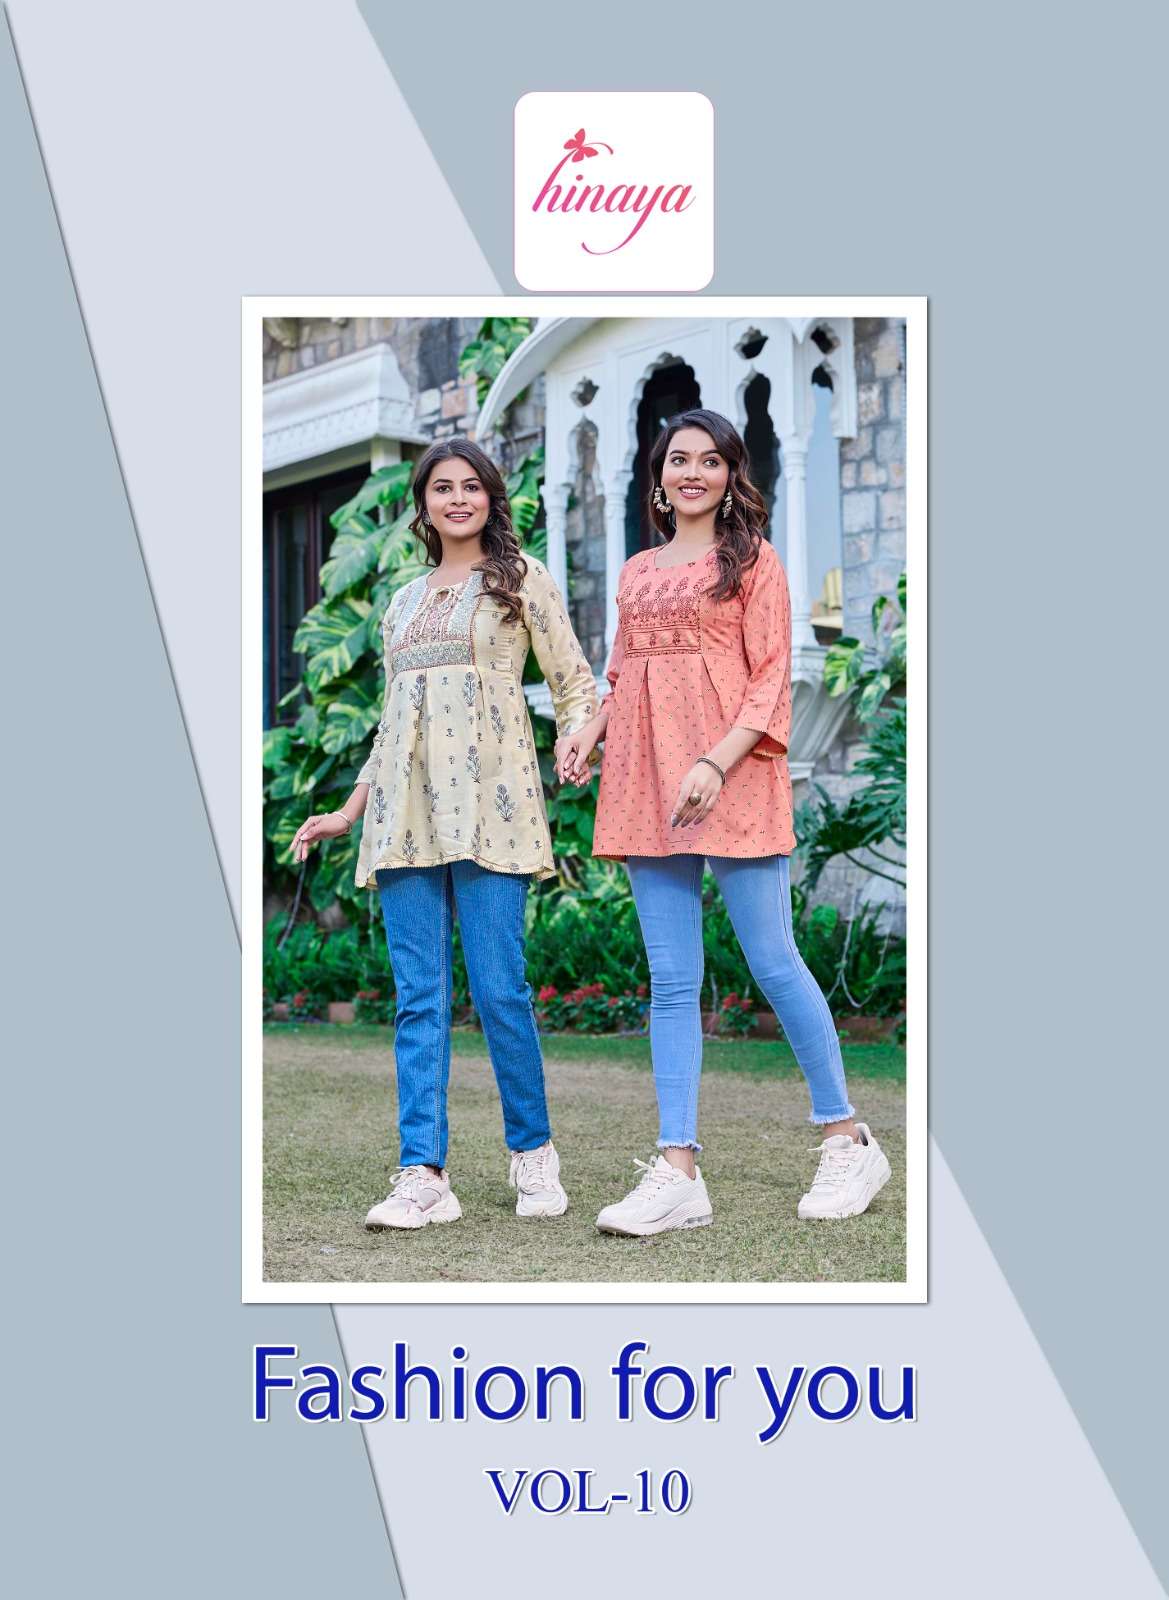 FASHION 4 YOU VOL 5 RAYON 14 KG TRENDY WESTERN SHORT TOPS WITH DIFFERENT PATTERN BY HINAYA BRAND WHO...